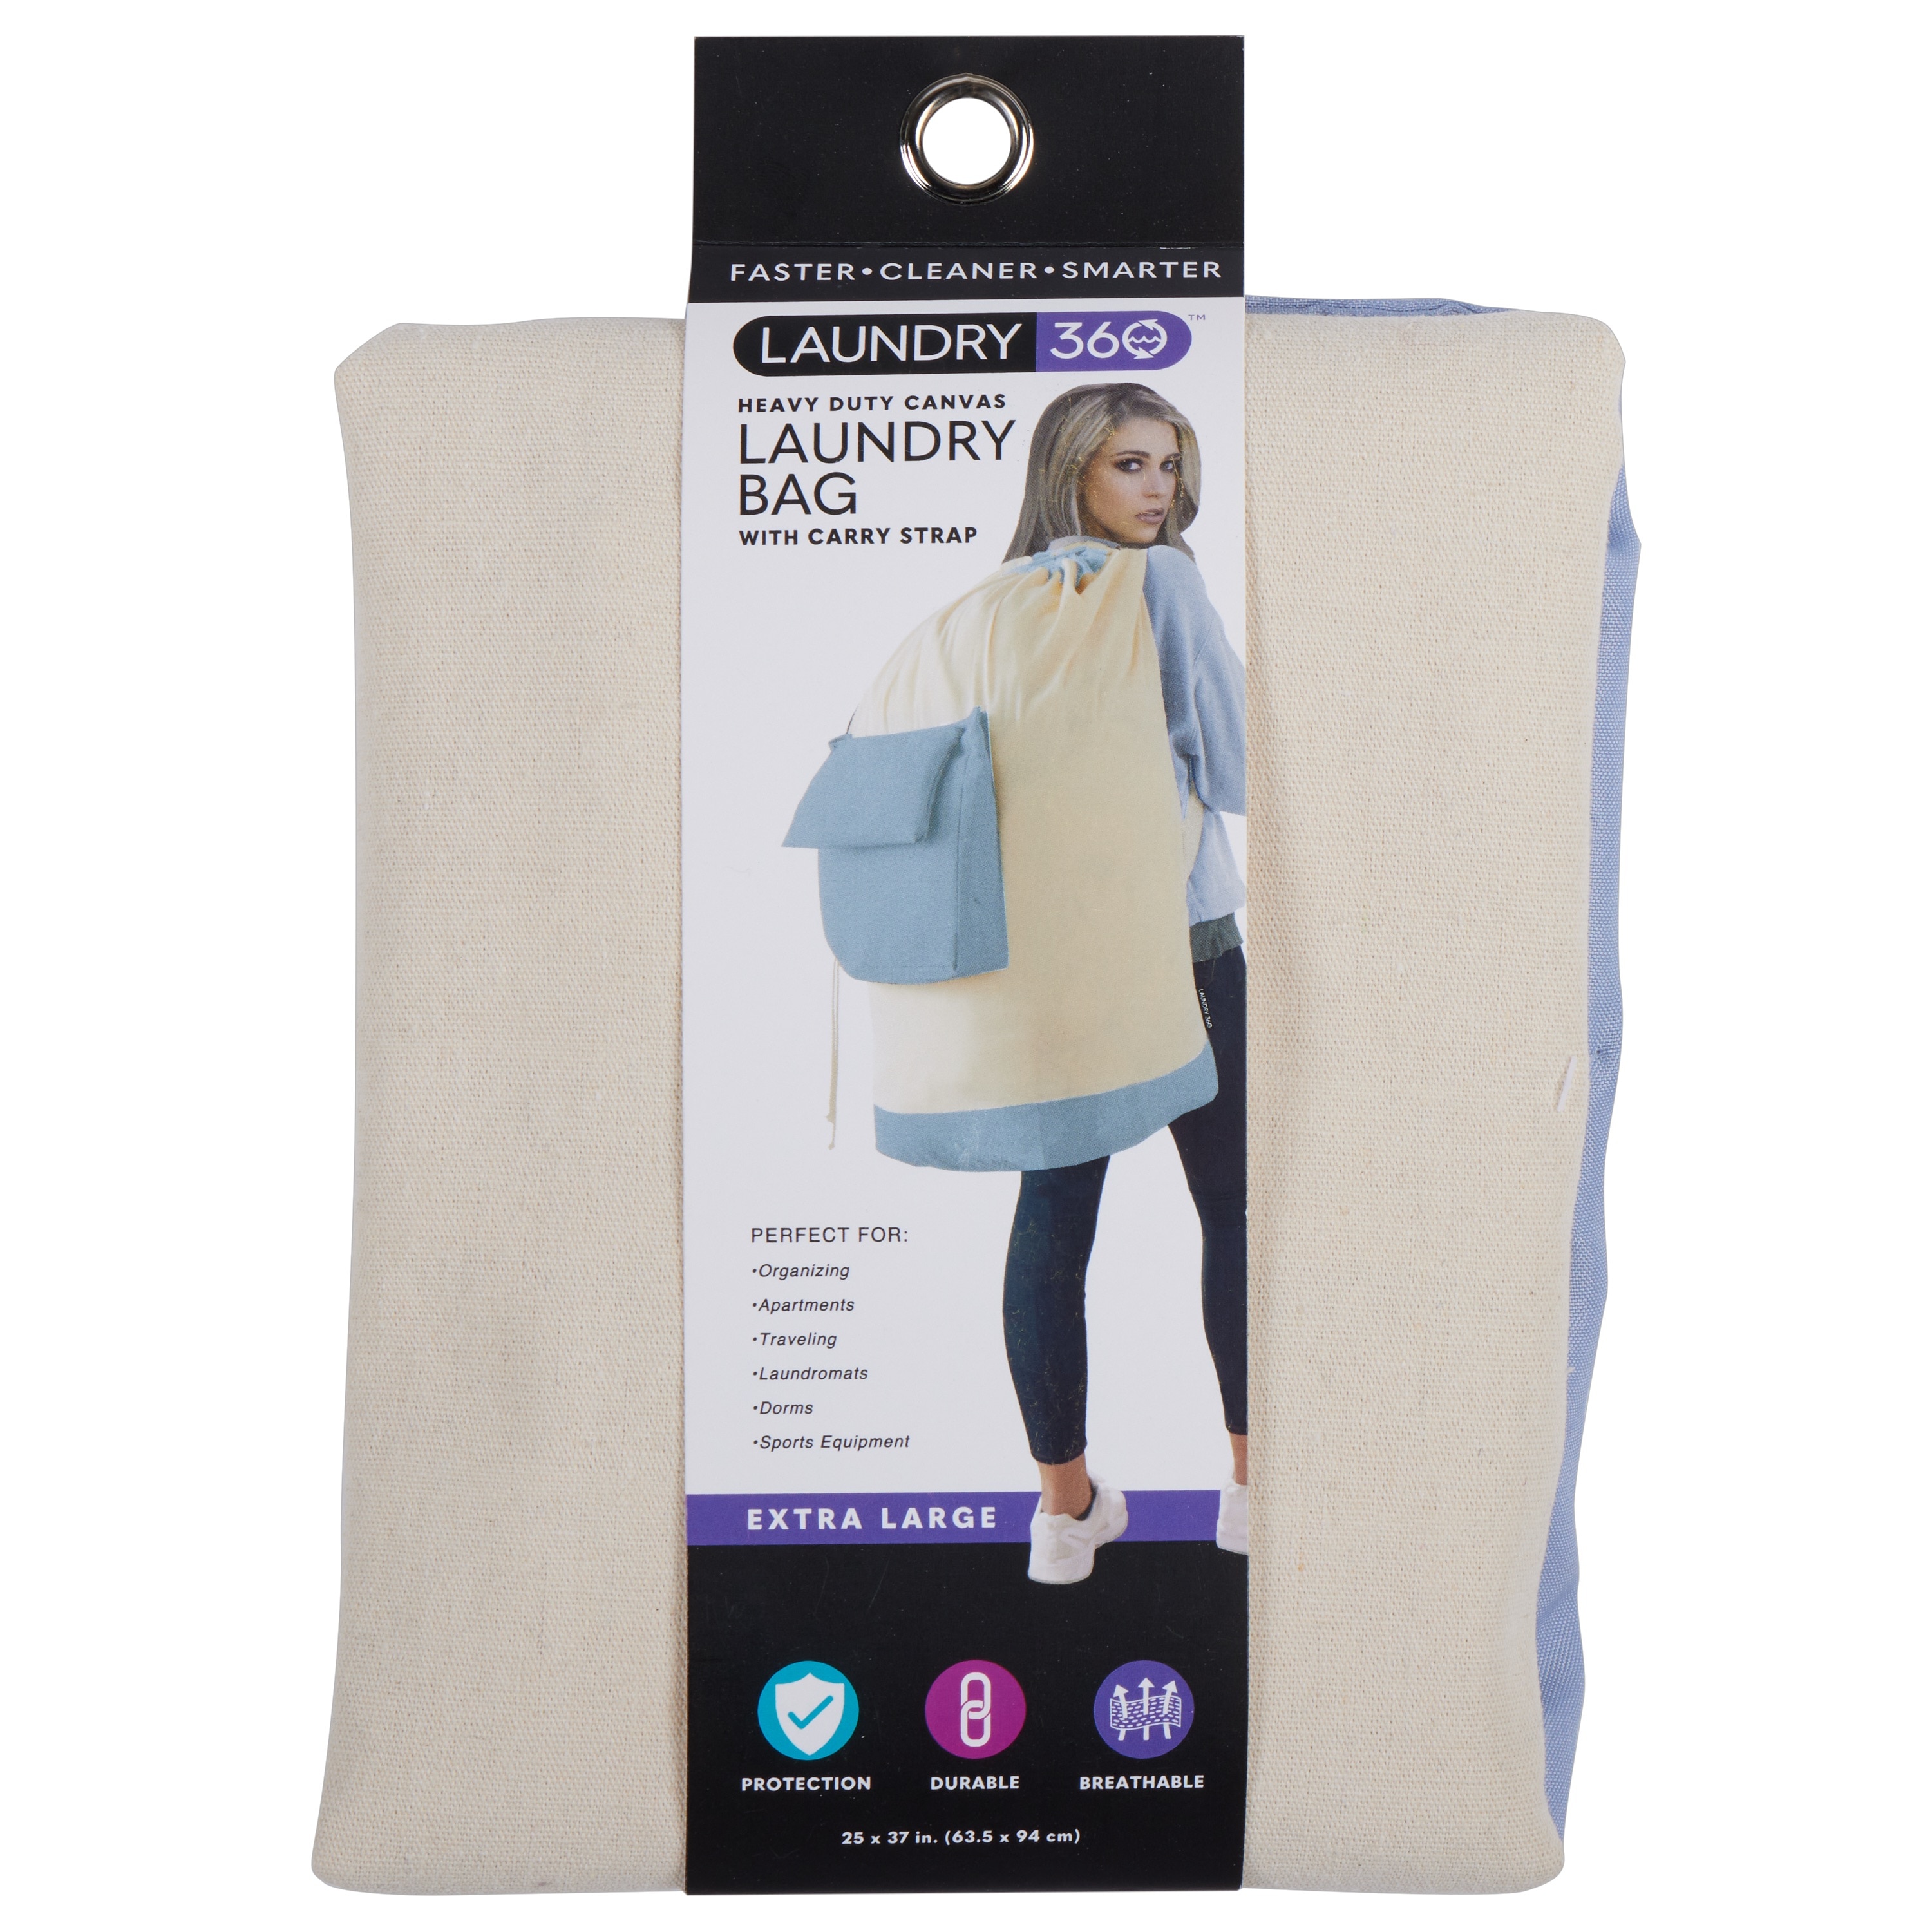 Laundry 360 Heavy Duty Laundry Bag With Carry Strap